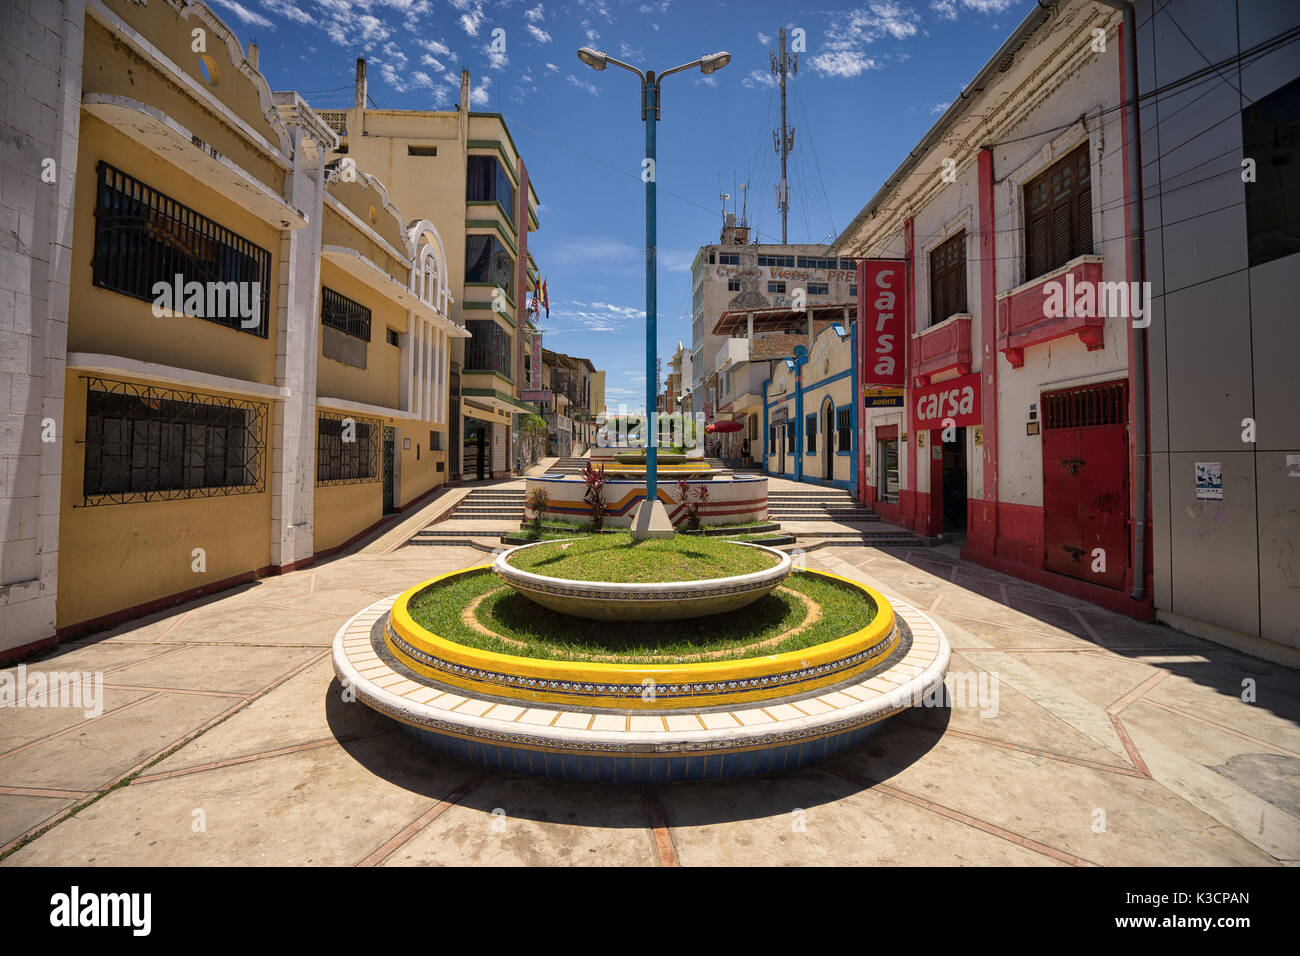 March 19, 2017 Tumbes, Peru: empty street leading to the town center on a hot day Stock Photo